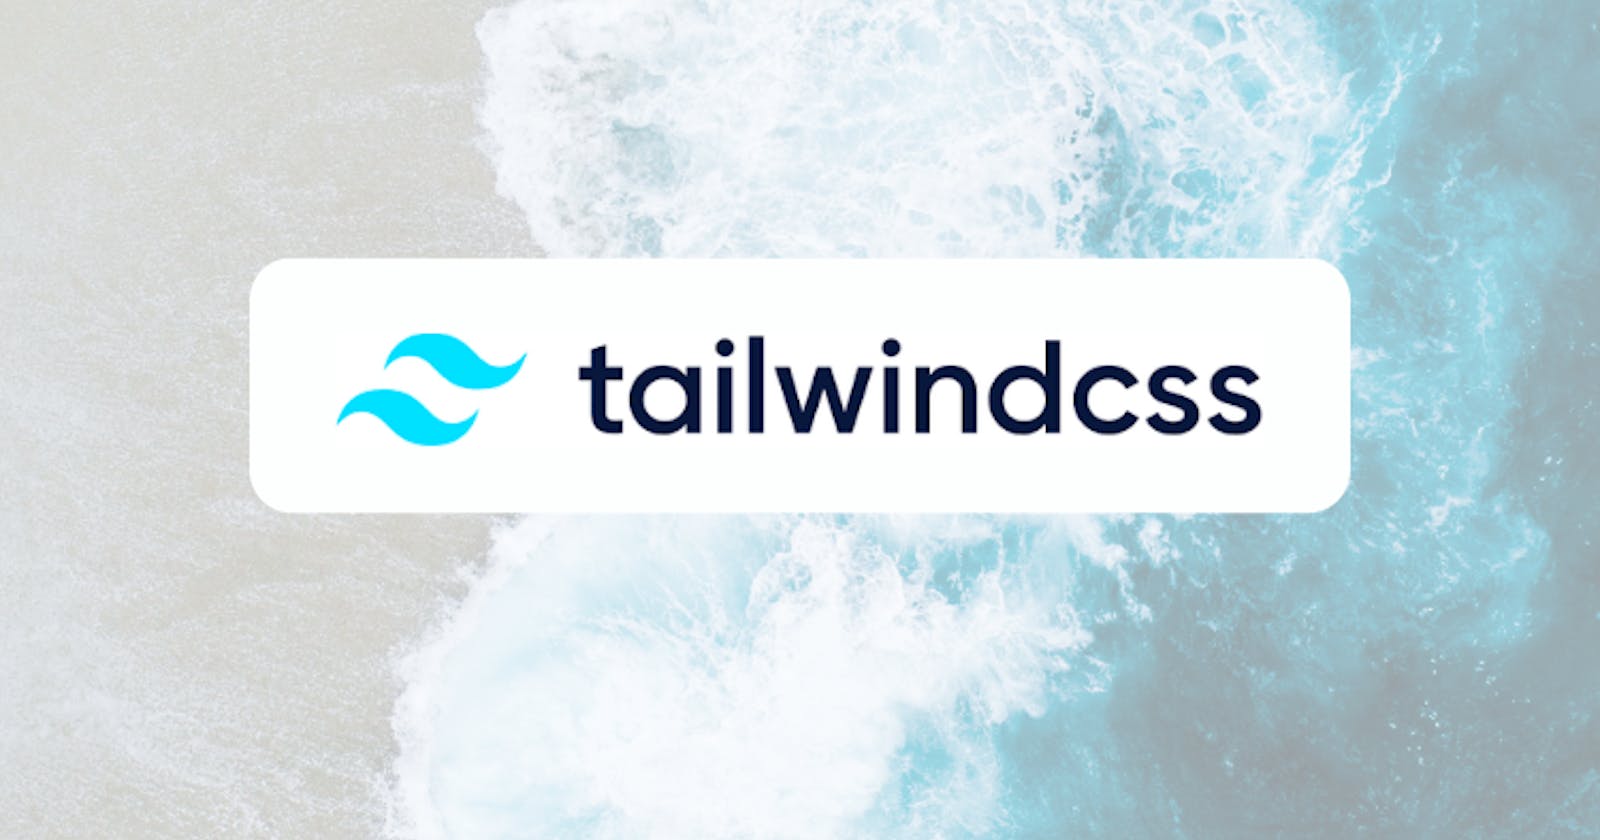 Effects & Filters with Tailwindcss